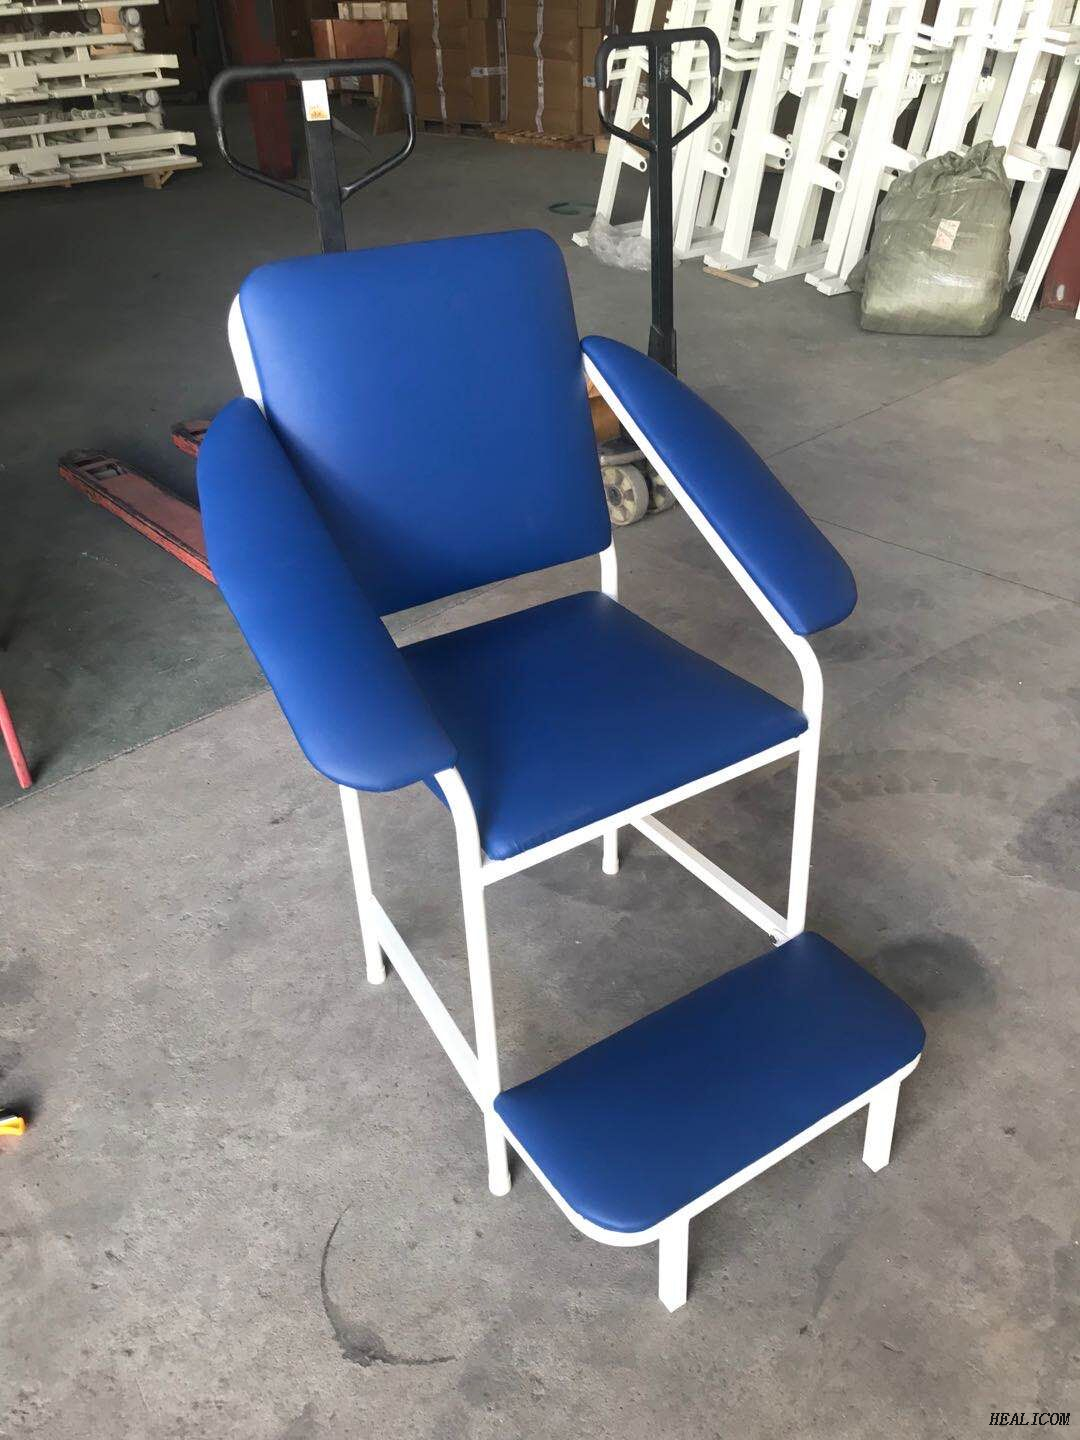 Hospital furniture mobilemblood patient medical blood collection chair